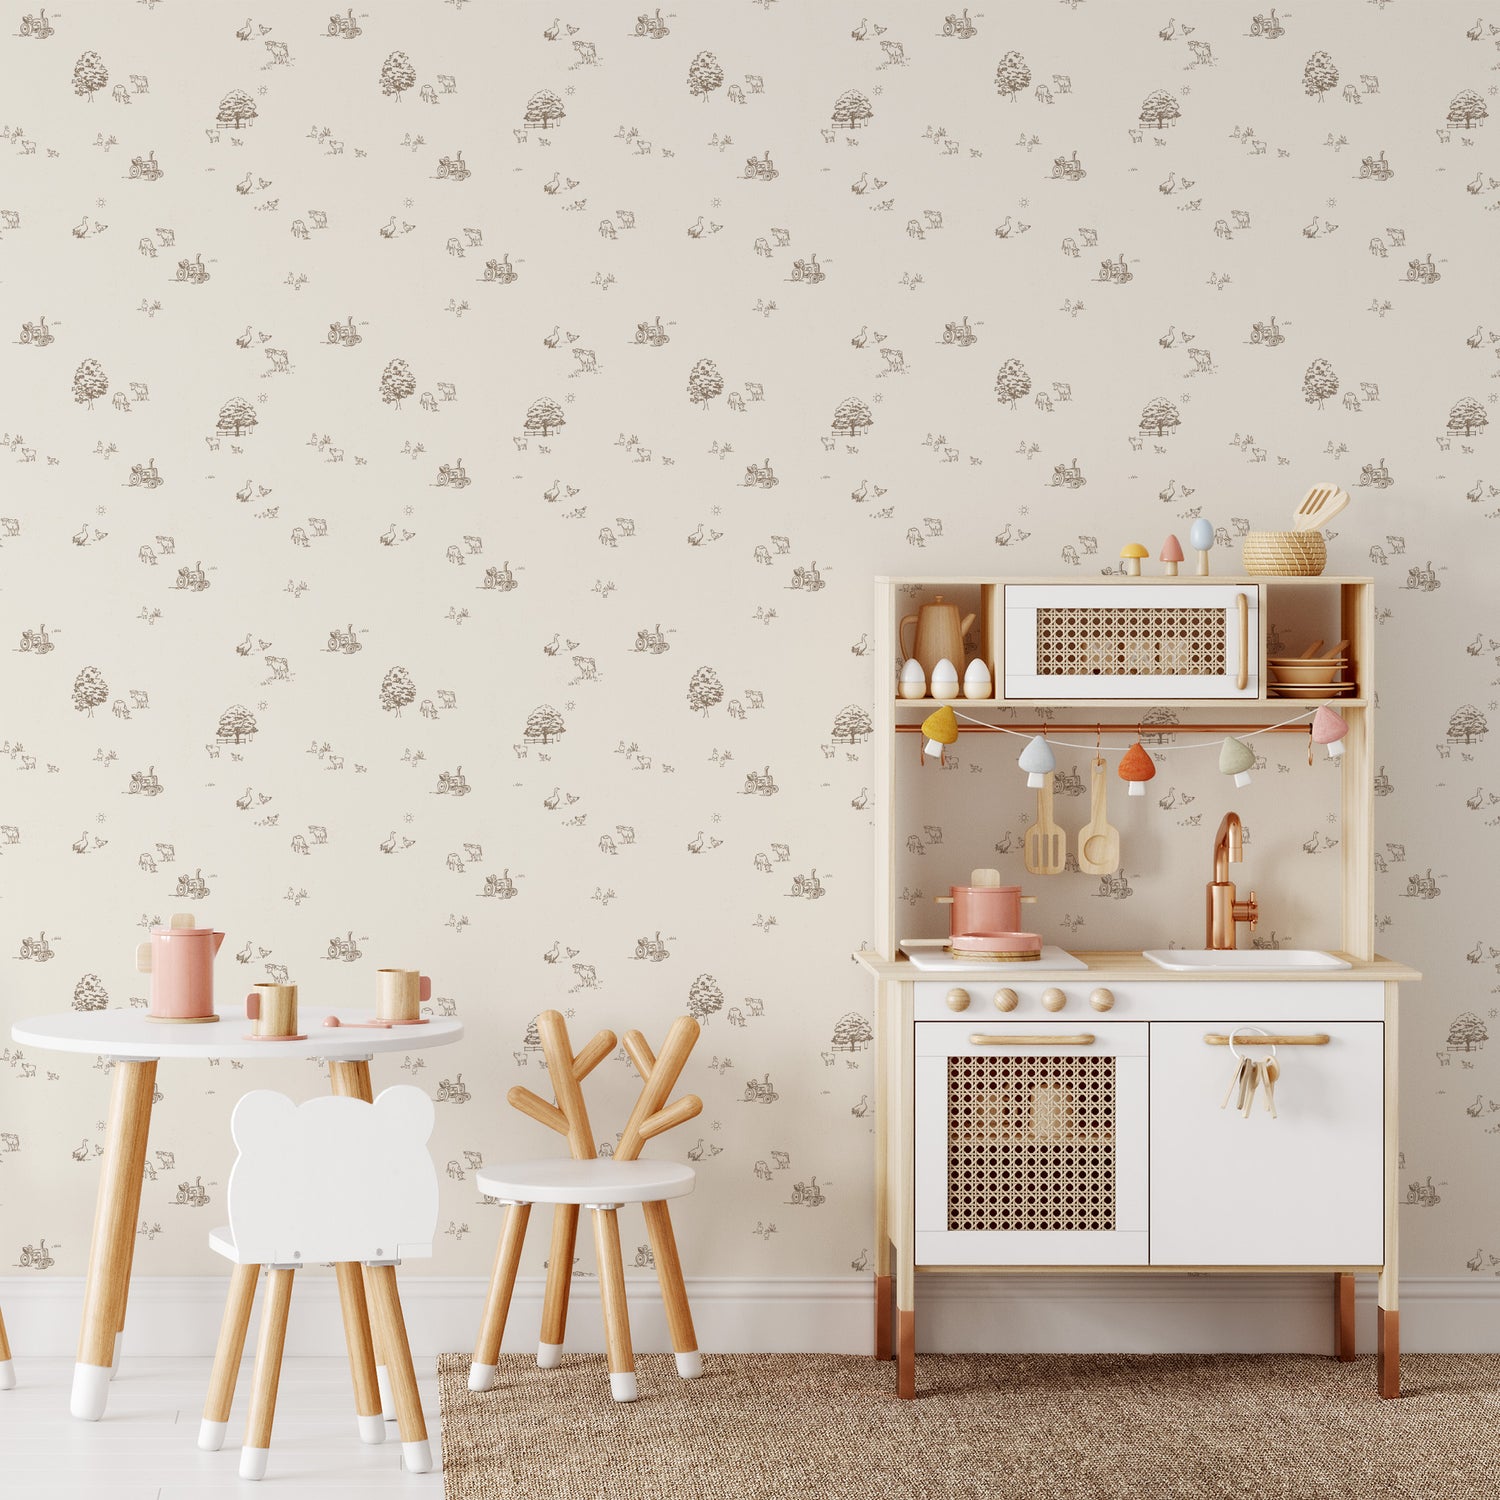 This nursery shows our Country Farm Wallpaper in Brown. This peel and stick, removable wallpaper was designed by artist Mariah Cottrell and features farm animals and trees in a countryside scene.